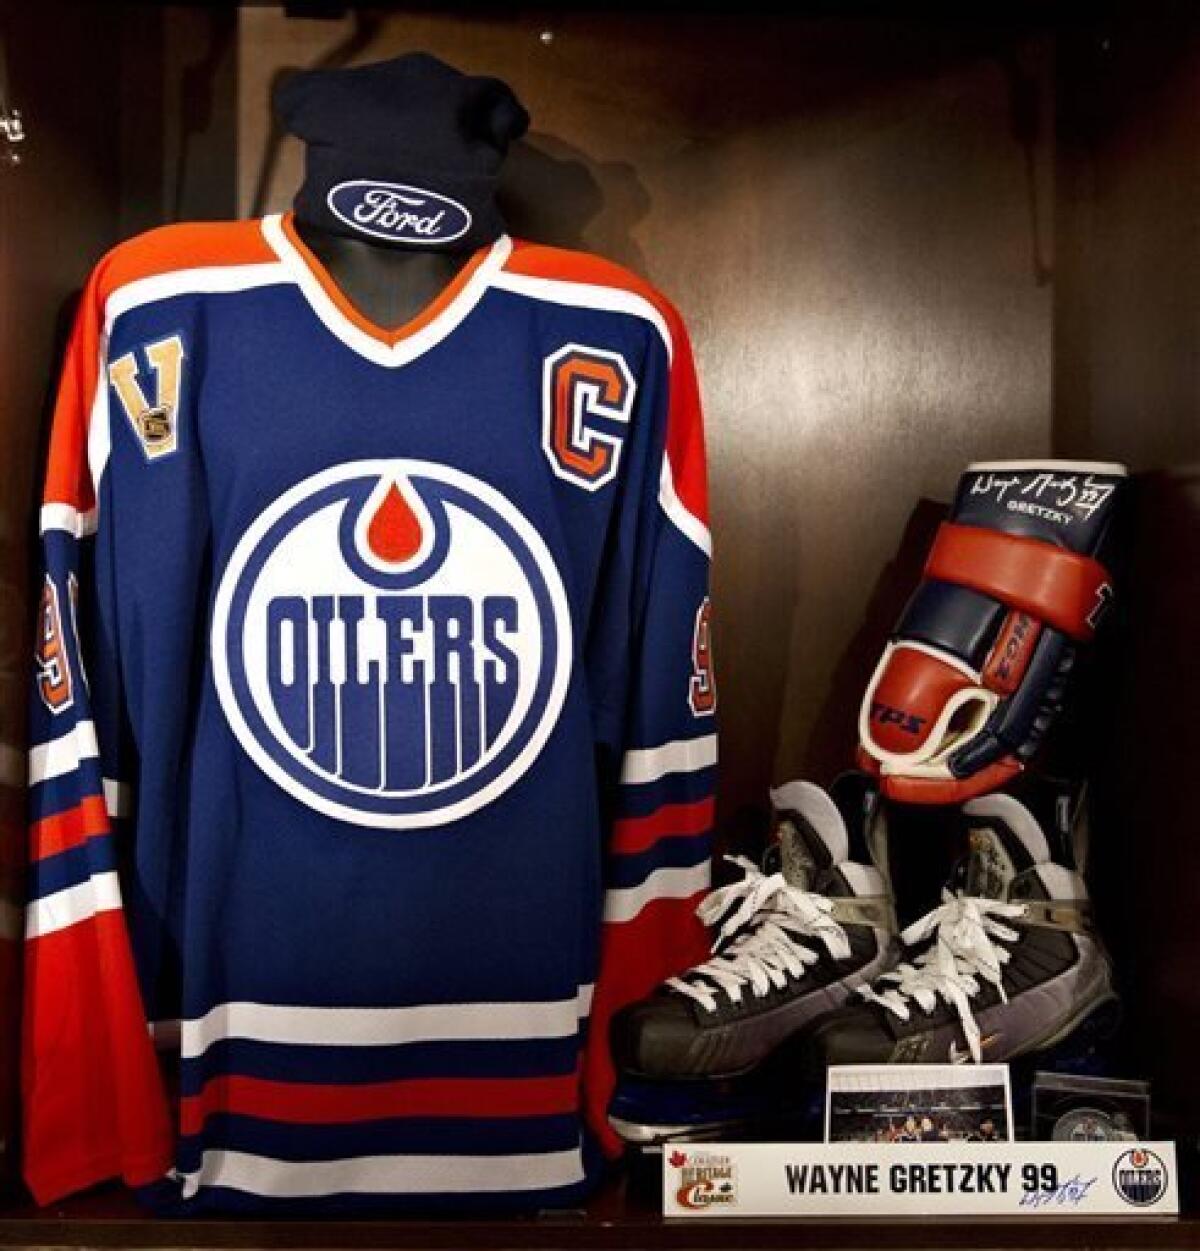 Wayne Gretzky's Record-Setting Jersey From Final NHL Game Hits Auction